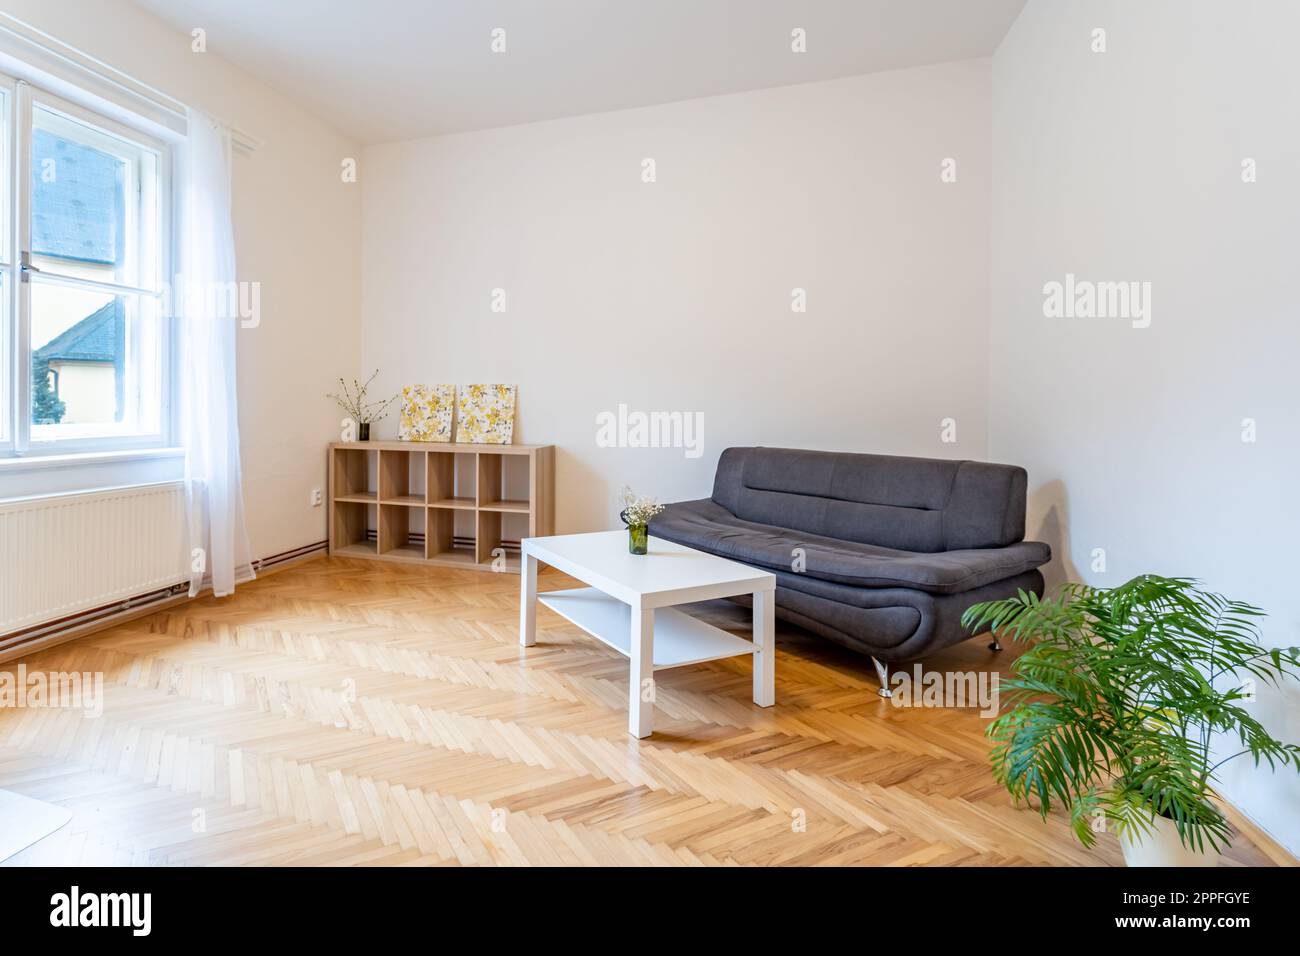 living room in a minimalist style Stock Photo